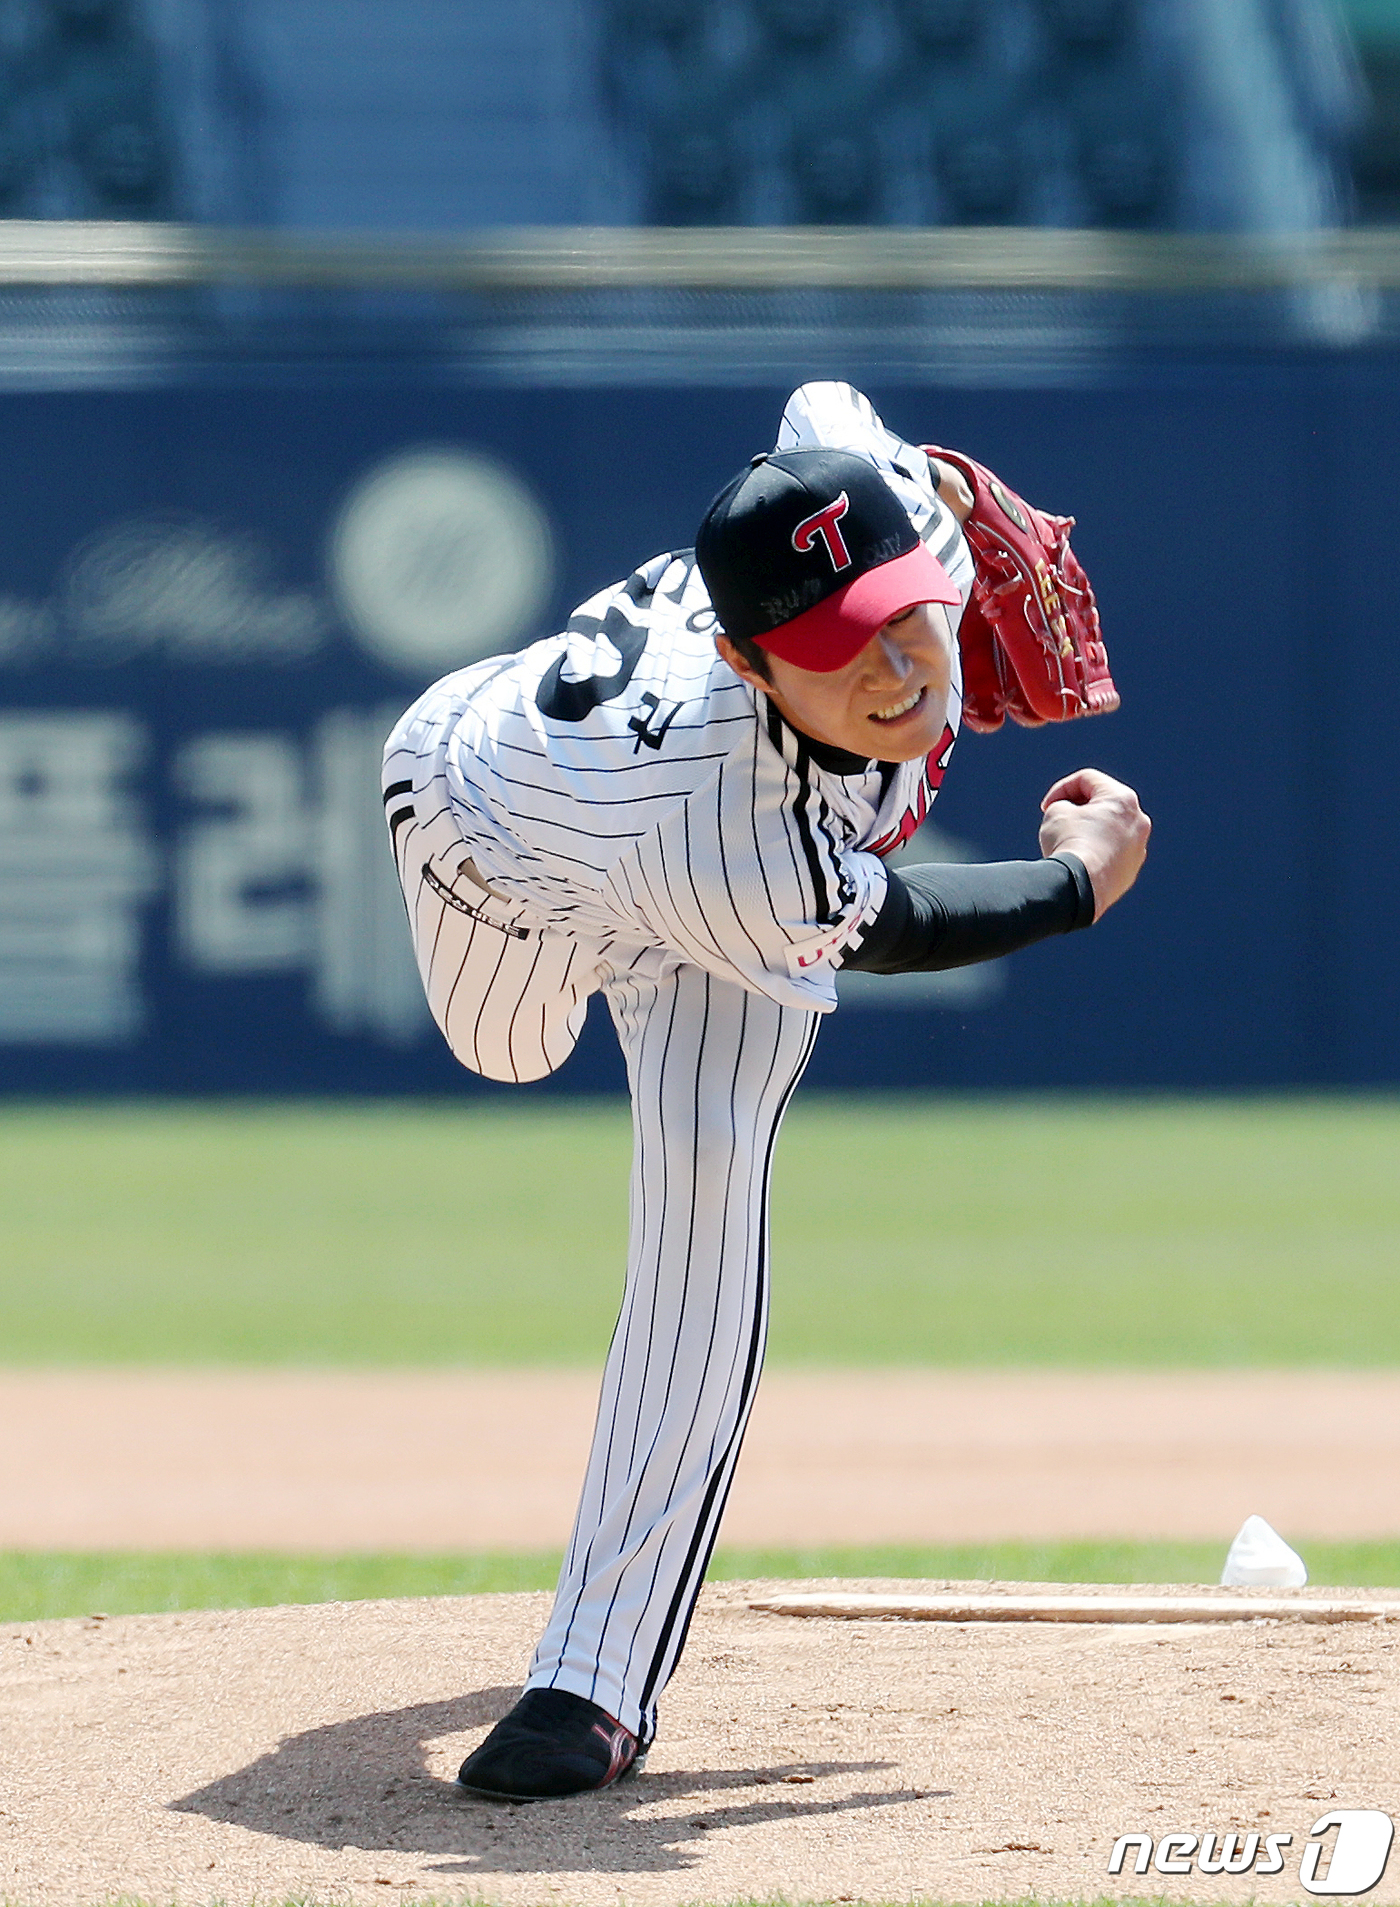 Seoul: = The opening of the KBO League 2020 season has been delayed for more than a month due to the new coronavirus infection (Corona 19), and each club is soothing its own blue-white battle, during which the LG Twins succeeded in finding a new face.LG, who has completed spring camp in Sydney, Japan, has been training at Jamsil-dong Stadium since the short camp training at the Ariel Lin 2 training center in the middle of last month.During this period, LG has conducted its own bout of blue (including 3 Ariel Lin) in total nine times and will have its 10th and last Kyonggi on the 18th as scheduled.It has been a month since its own Cheongbaekjeon, but the nature of the competition between the same teams has forced some tension to fall. Some veteran players are complaining about the difficulty of raising their condition.However, it was a valuable opportunity for new players who had little experience, especially LG, which had a lot of experience with new players and experienced expectants during this period and took a clear eyeball.If the pilot Kyonggi had been held without a variable called Corona 19, or if it was possible to practice with the opponent team, the main players would have been mainly in terms of power checks, and those who had no experience or had little experience in the first group would not have had a lot of opportunities.However, the opportunity of new faces naturally increased as the self-fulfillment of the blue-white war spread 10 times.These include first-round nominee Pitcher Lee Min-ho in 2020, left-hander Kim Yun-stock, who joined the first round of the second draft in 2020, Lee Sang-kyu, who began to show off his true value after six years of joining, and fielder expectant Lee Jae-won.All of them were actively used in their own Cheongbaekjeon and played a remarkable role.Lee Min-ho made his 4Kyonggi appearance with Bullpen, scoring 4 runs on 4 walks and 4 runs on 10 hits in 713 innings, and Kim Yun-stock made 5 starts, including 1 start, and allowed 10 hits, 5 strikeouts, 3 strikeouts and 1 run average 0.8 for 11 innings. I got a score of 2.Lee Sang-kyu made five appearances, including two starts, and allowed four runs (three earned) on nine hits and three walks in 1313 innings, and Lee Jae-won went 2 Hit for eight (one home run, one double) and one walk with two RBIs and one walk.Lee Min-ho and Kim Yun-stock, who boasted dignified guts in front of the pro-professional candidate for the future one-two punch, Lee Sang-kyu, who boasted a 150-kilometer fastball, and Lee Jae-won, who both decorated with big hits, showed many impressive scenes.There is also an expectation that those who mentioned will be able to play a key role in the first group after the opening of the season.It is not impossible to enter the starting lineup, join the team, and join the Uta Daeta.There is a cautious theory that there are not many confrontations with other teams yet, so we can not be sure of our skills, but it is analyzed that they are resources with qualities in many ways.Kyonggi will be able to practice with the opponent team from the 21st, and additional inspections are likely to be made.Compared to the demonstration Kyonggi and the practice Kyonggi, the self-fulfilling war is less burdensome.A new player said, I was able to play Kyonggi relatively comfortably when I was dealing with the same team seniors.It is worth watching what kind of plus factor LGs choice, which used the chapter for the fullest time, will be in this season.